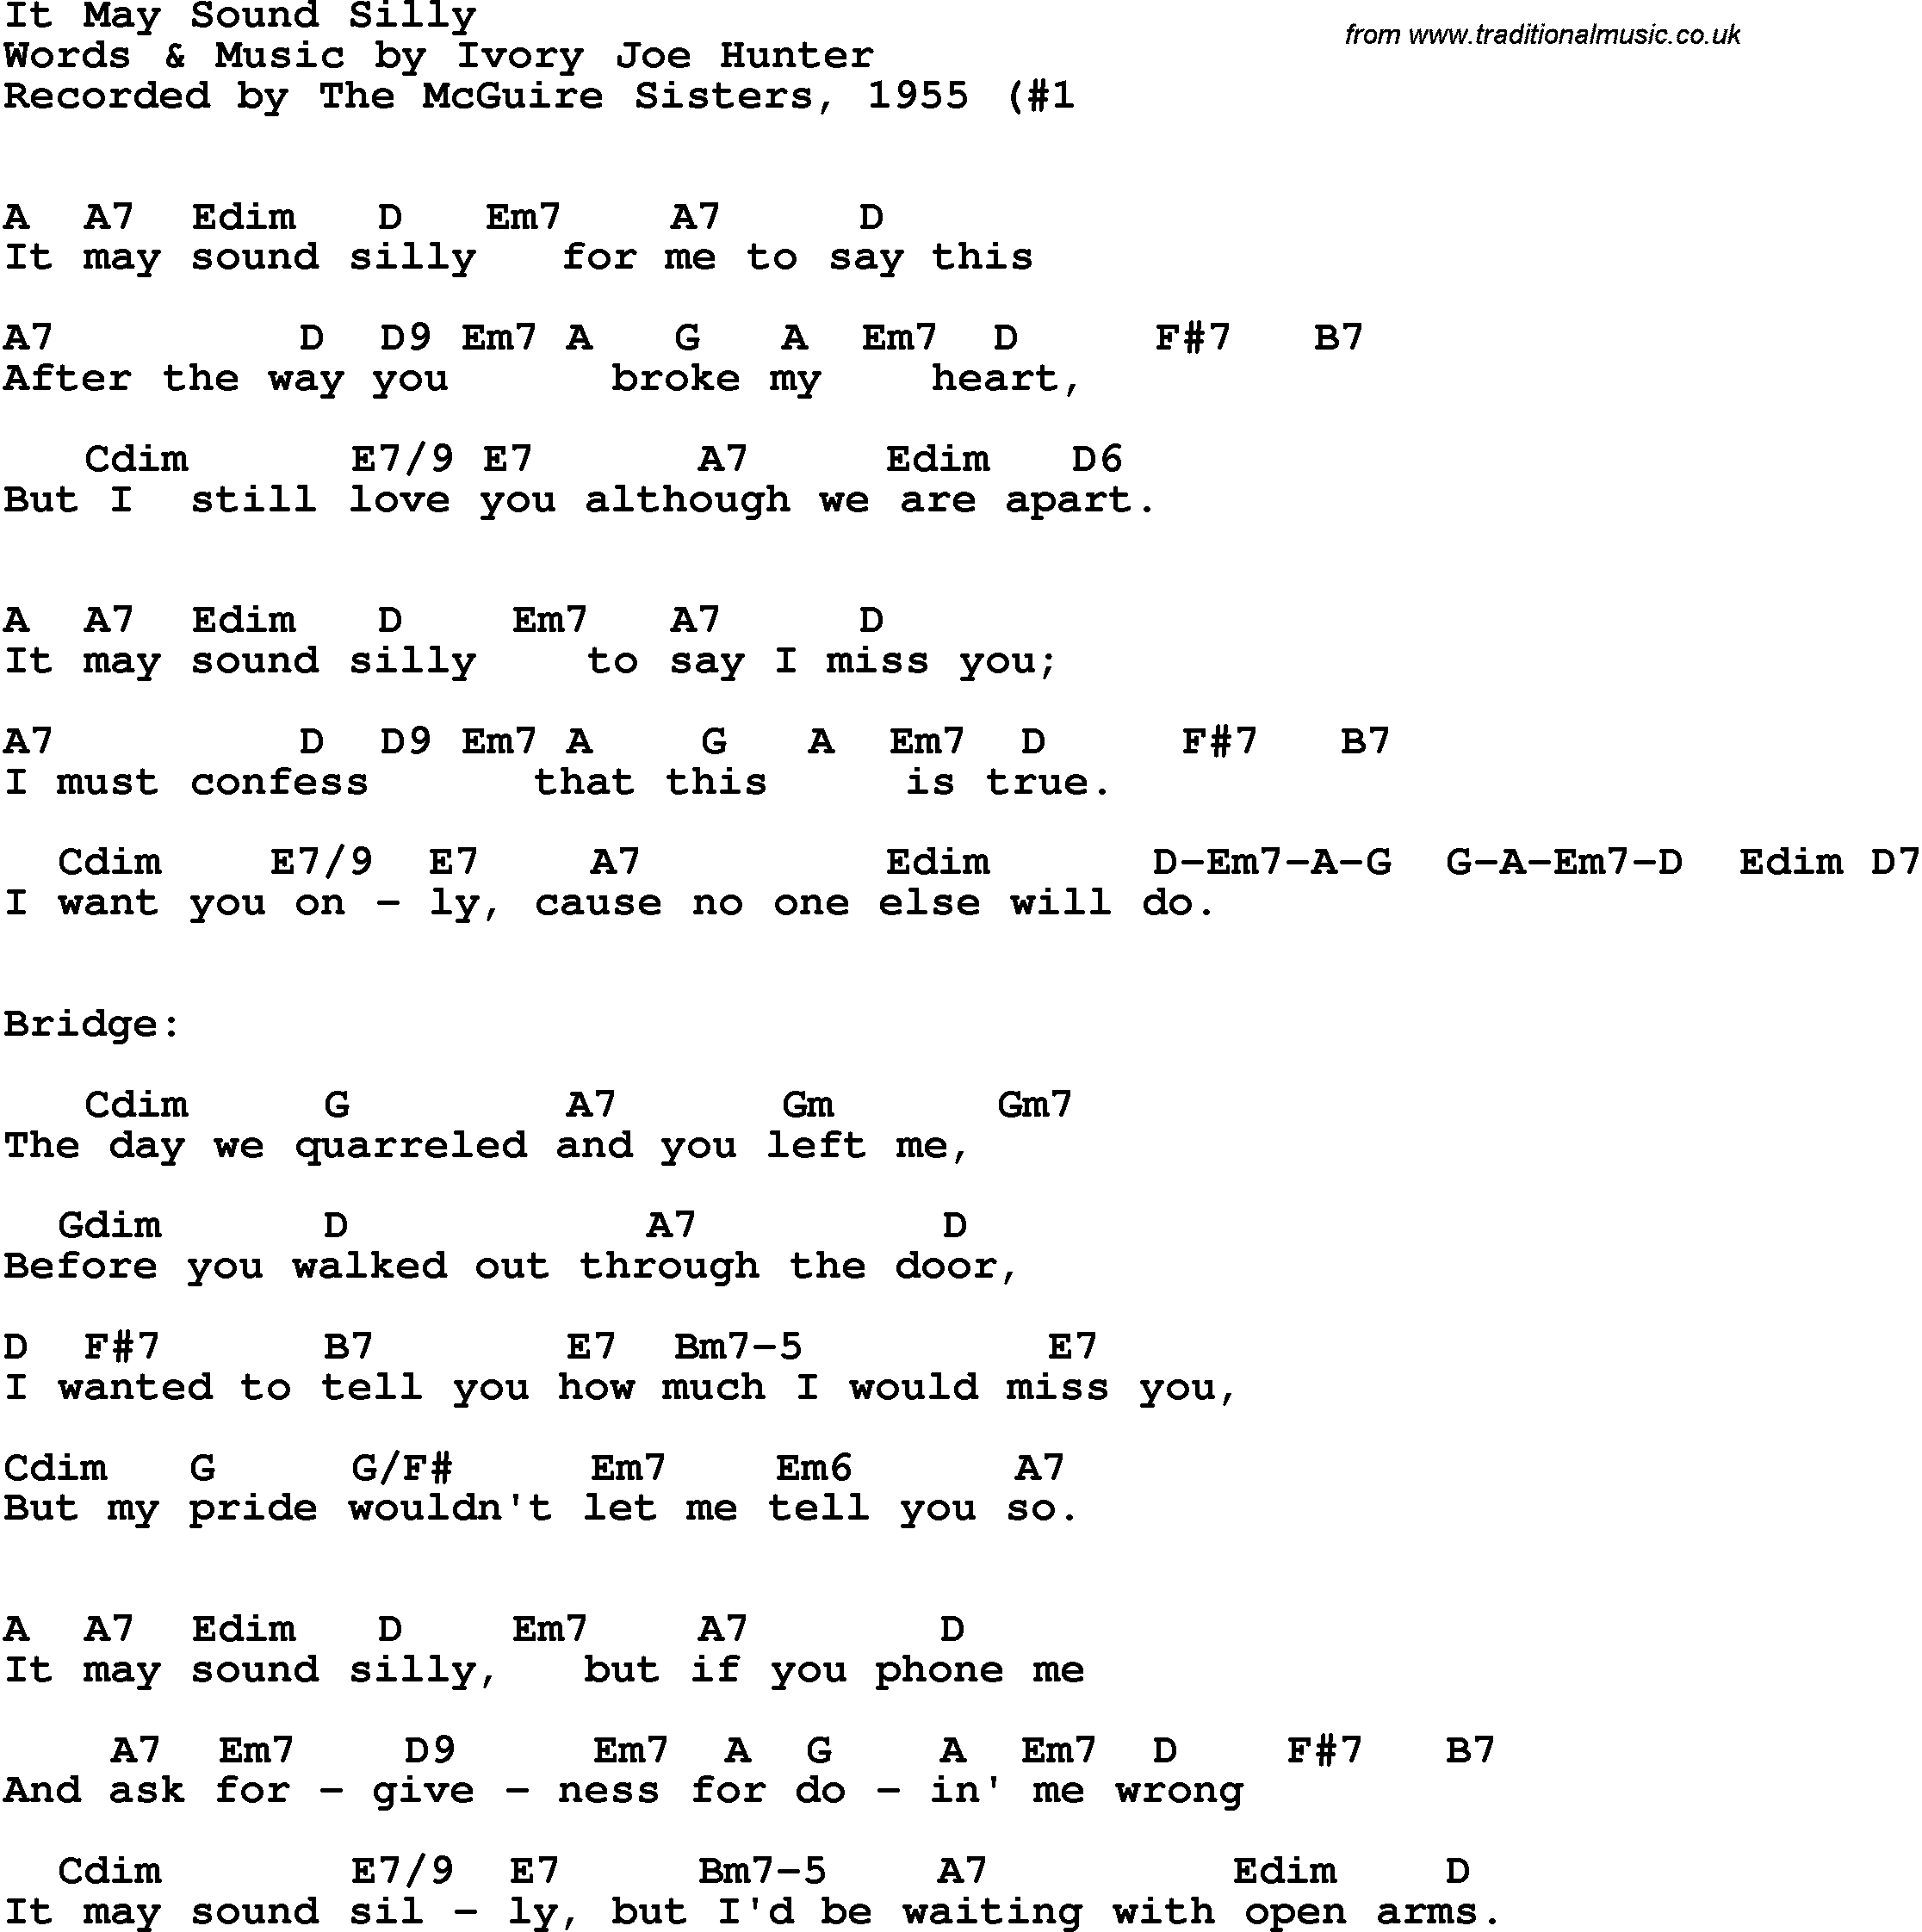 Song Lyrics with guitar chords for It May Sound Silly - The Mcguire Sisters, 1955